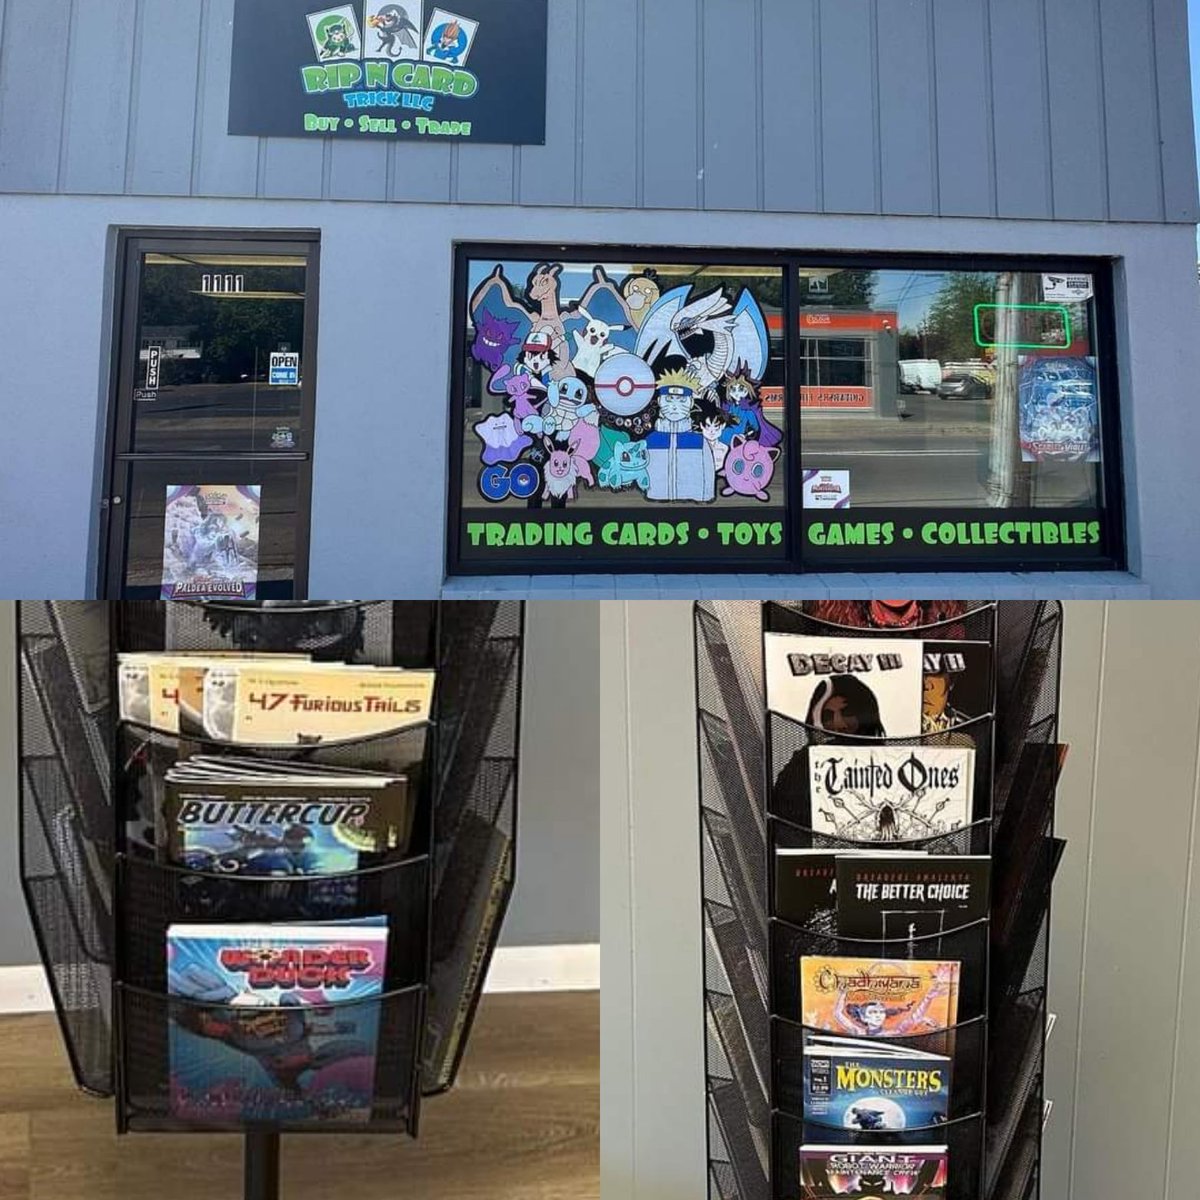 Our comics have arrived in yet another store: @ripncardtrick in OR. Thanks again to @ComicsMain for all the hard work!

#publisher #publishing #DarkFirePress #books #comics #store #shelfspace #spinnerrack #brickandmortar